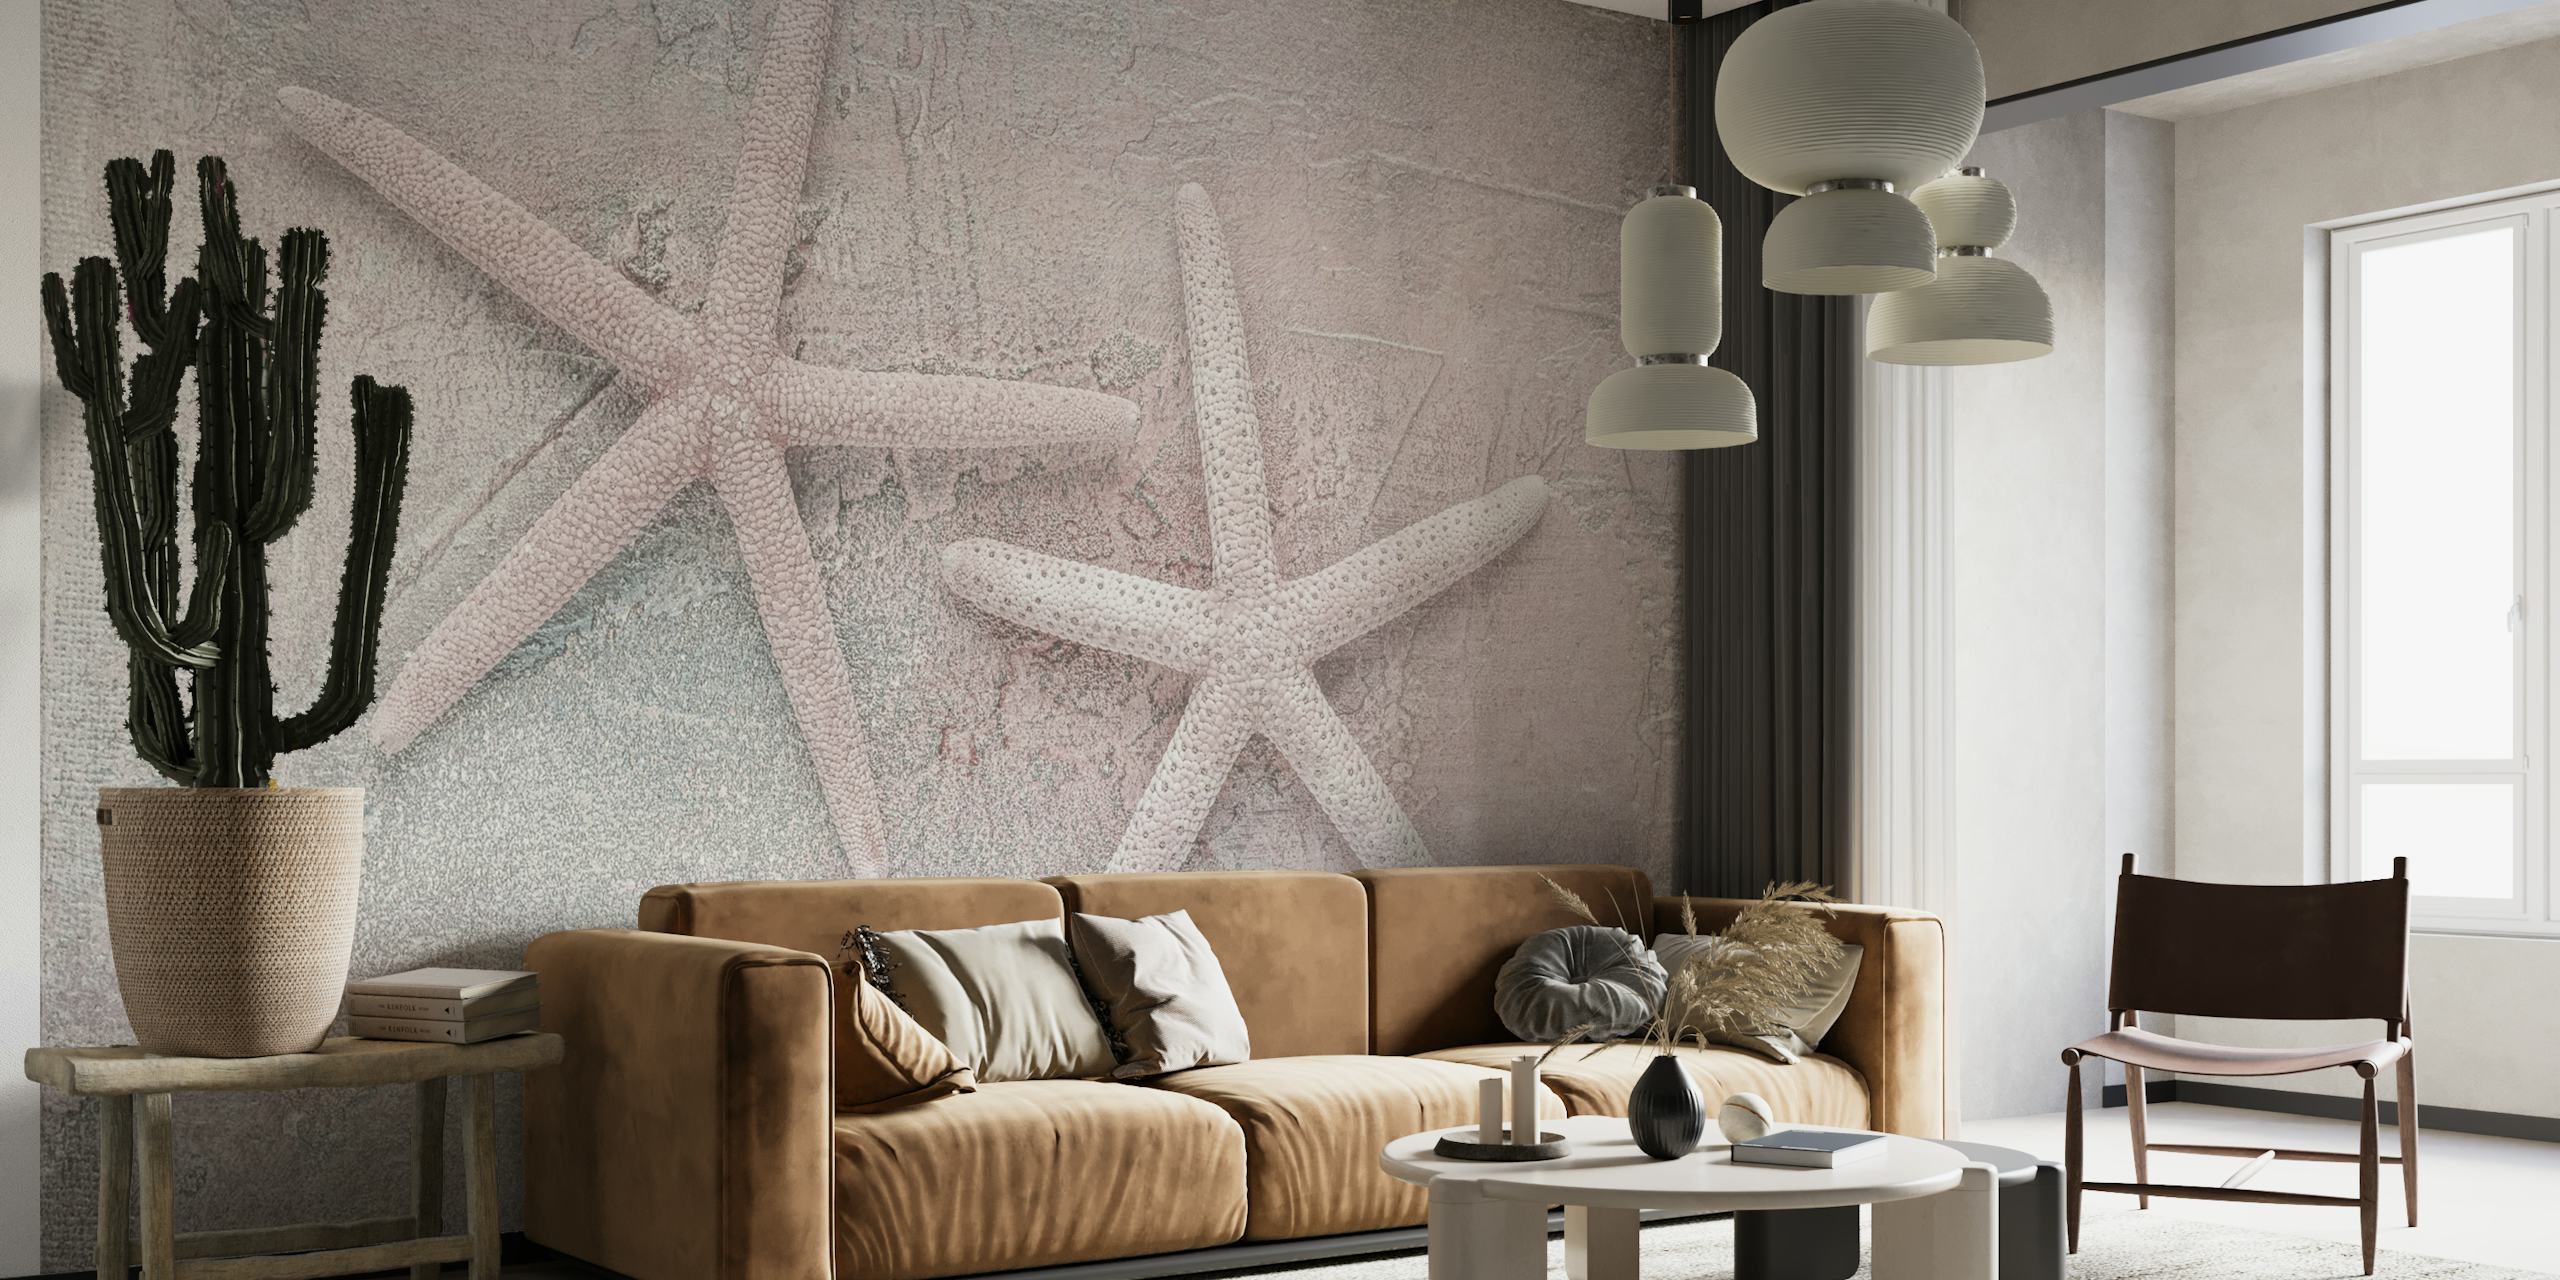 Blush Pink Starfish wall mural with two starfish on a textured background